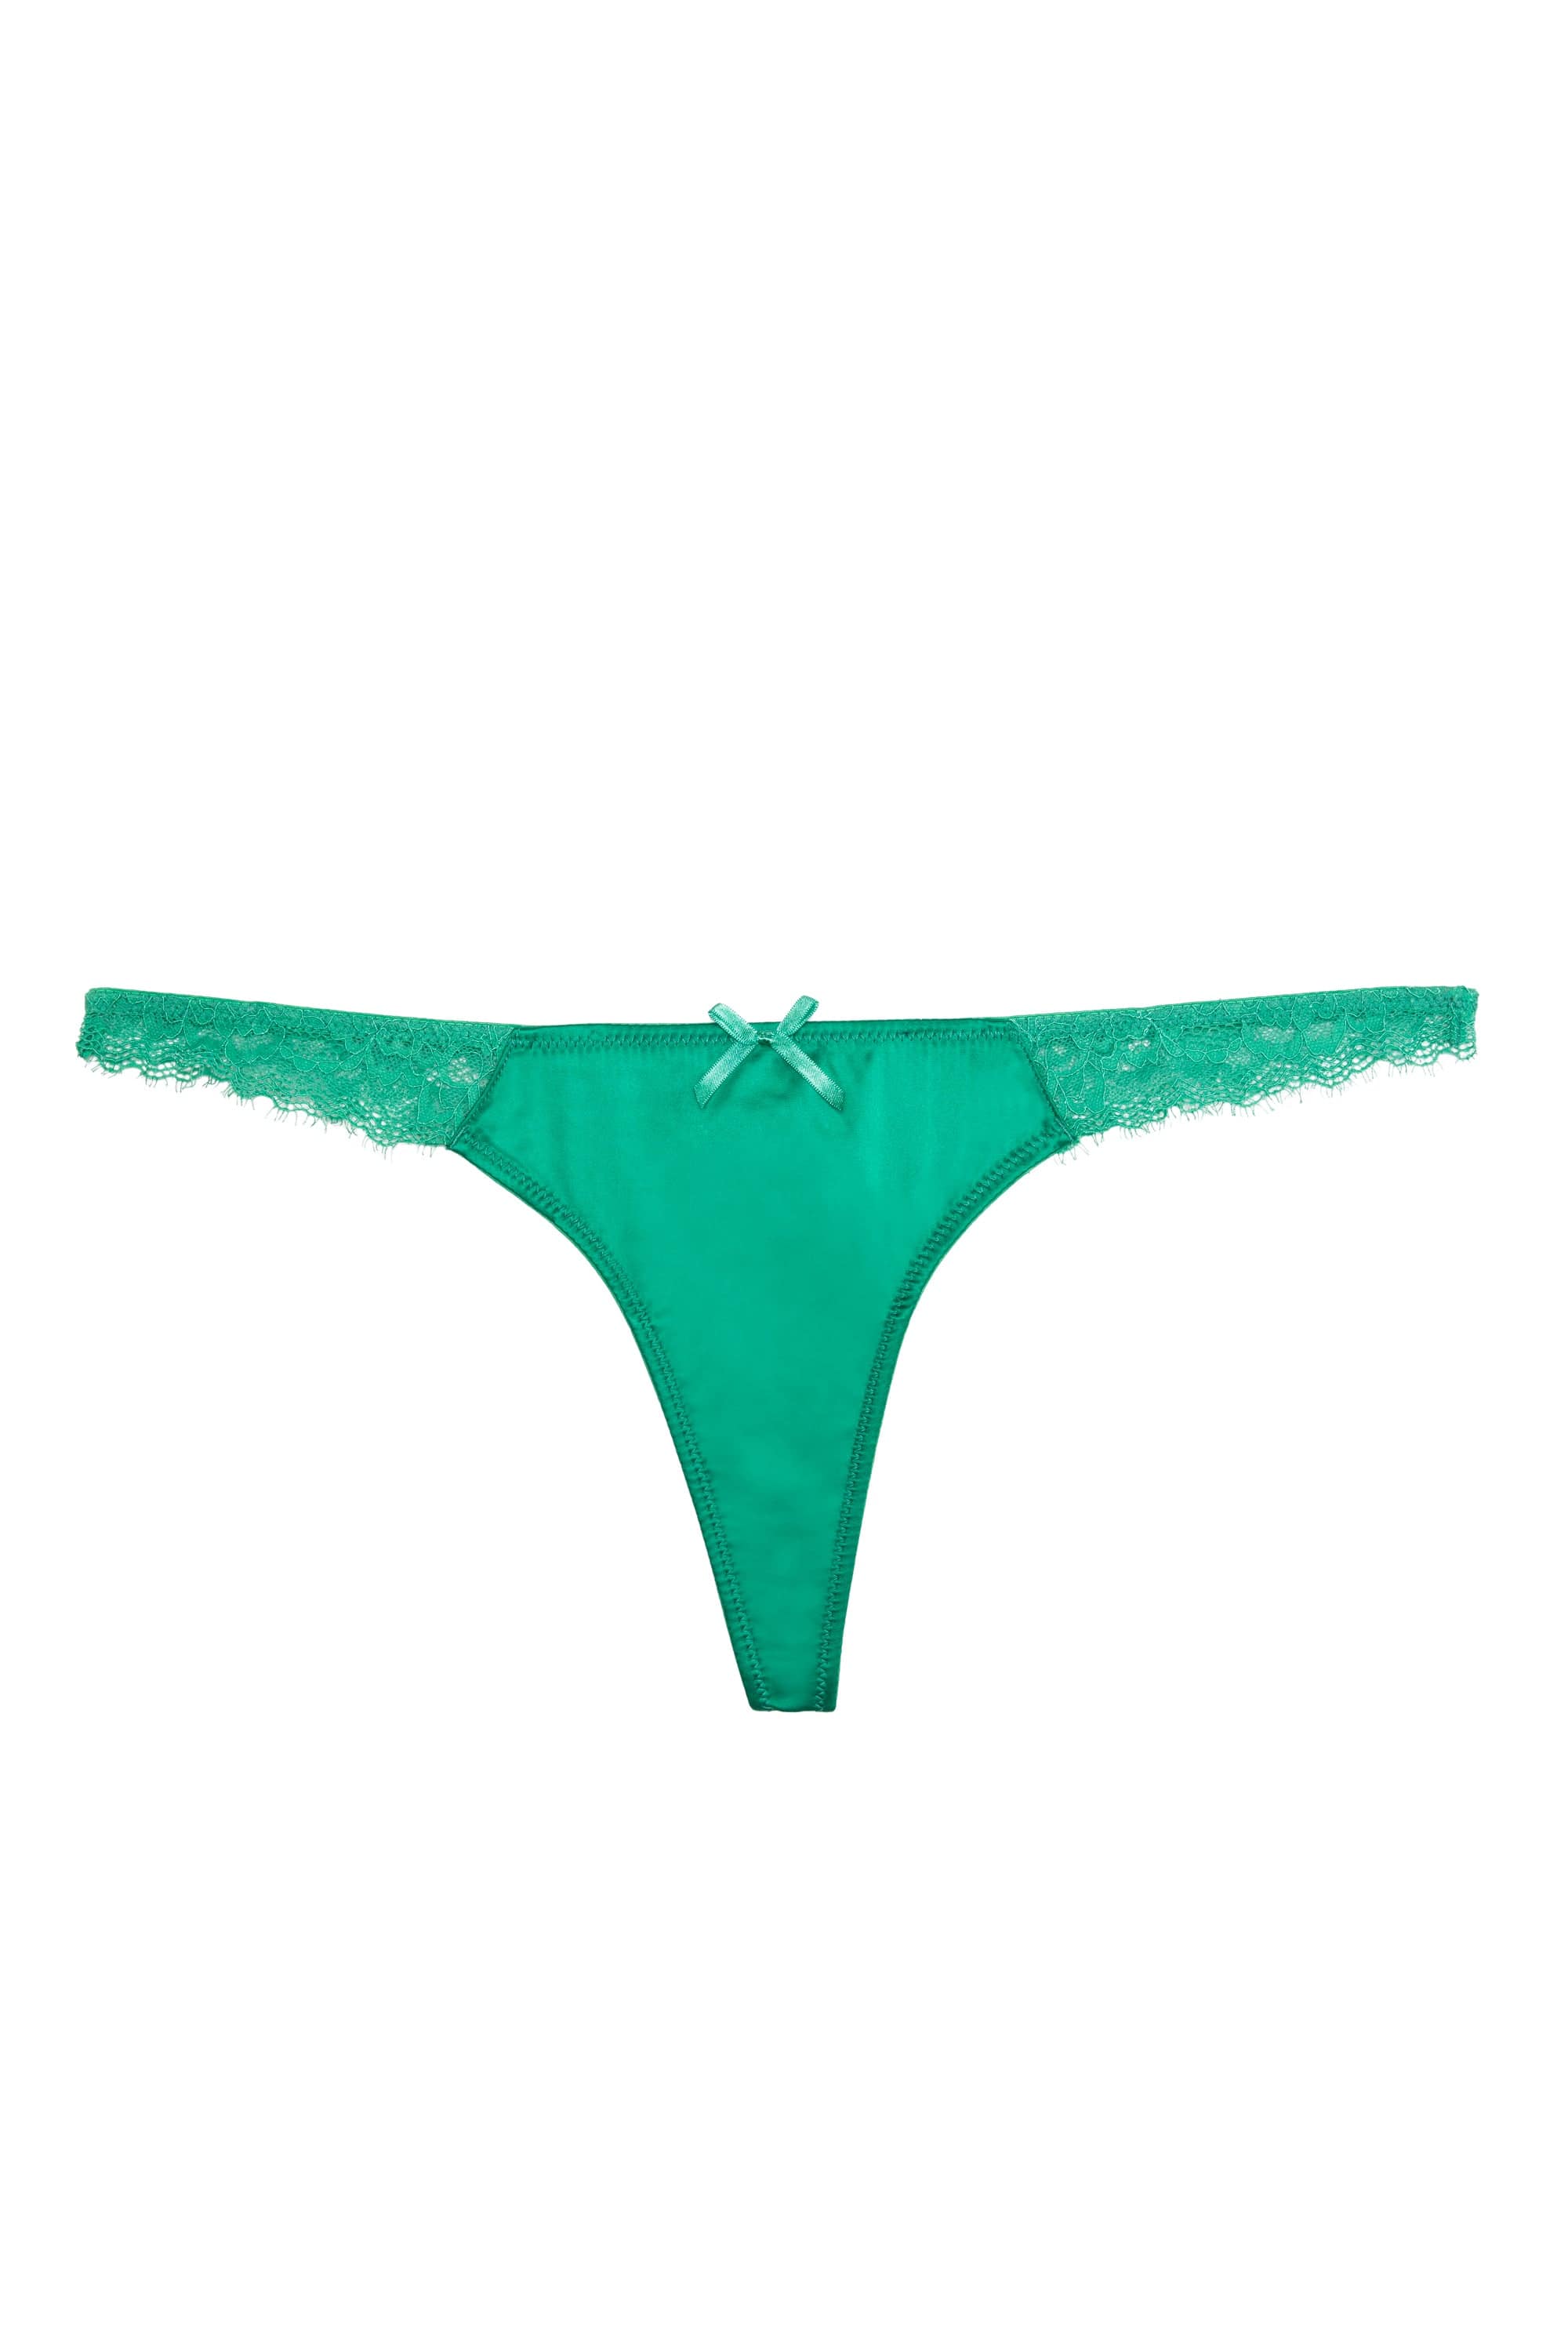 NWT! Lucky Brand Green, Red, Brown Lace Thong 3 Pack Size Small